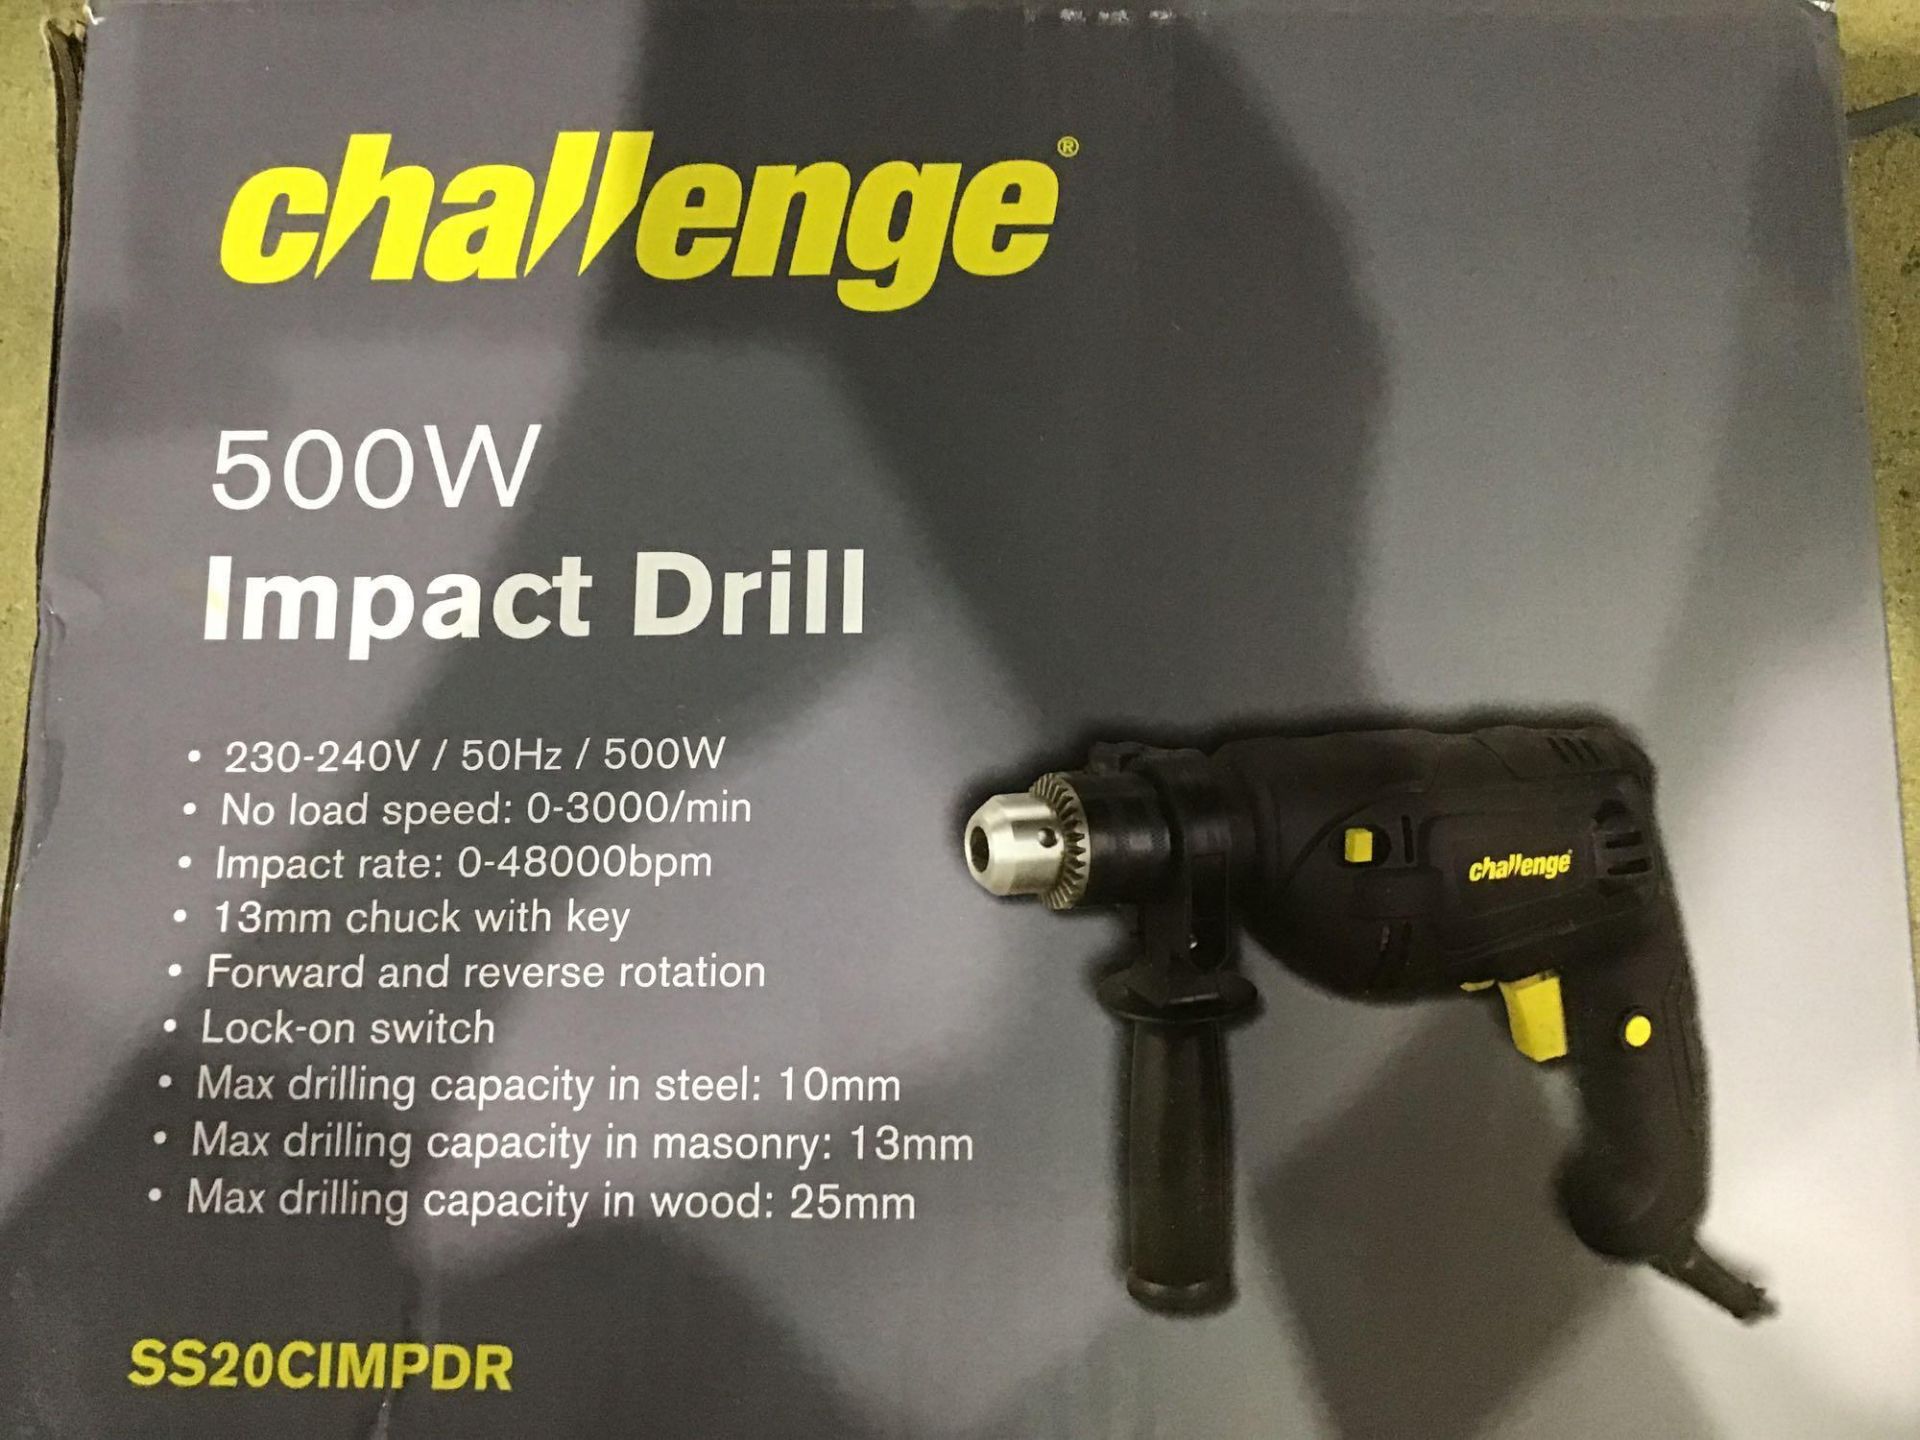 Challenge Corded Impact Drill - 500W - £15.00 RRP - Image 2 of 3